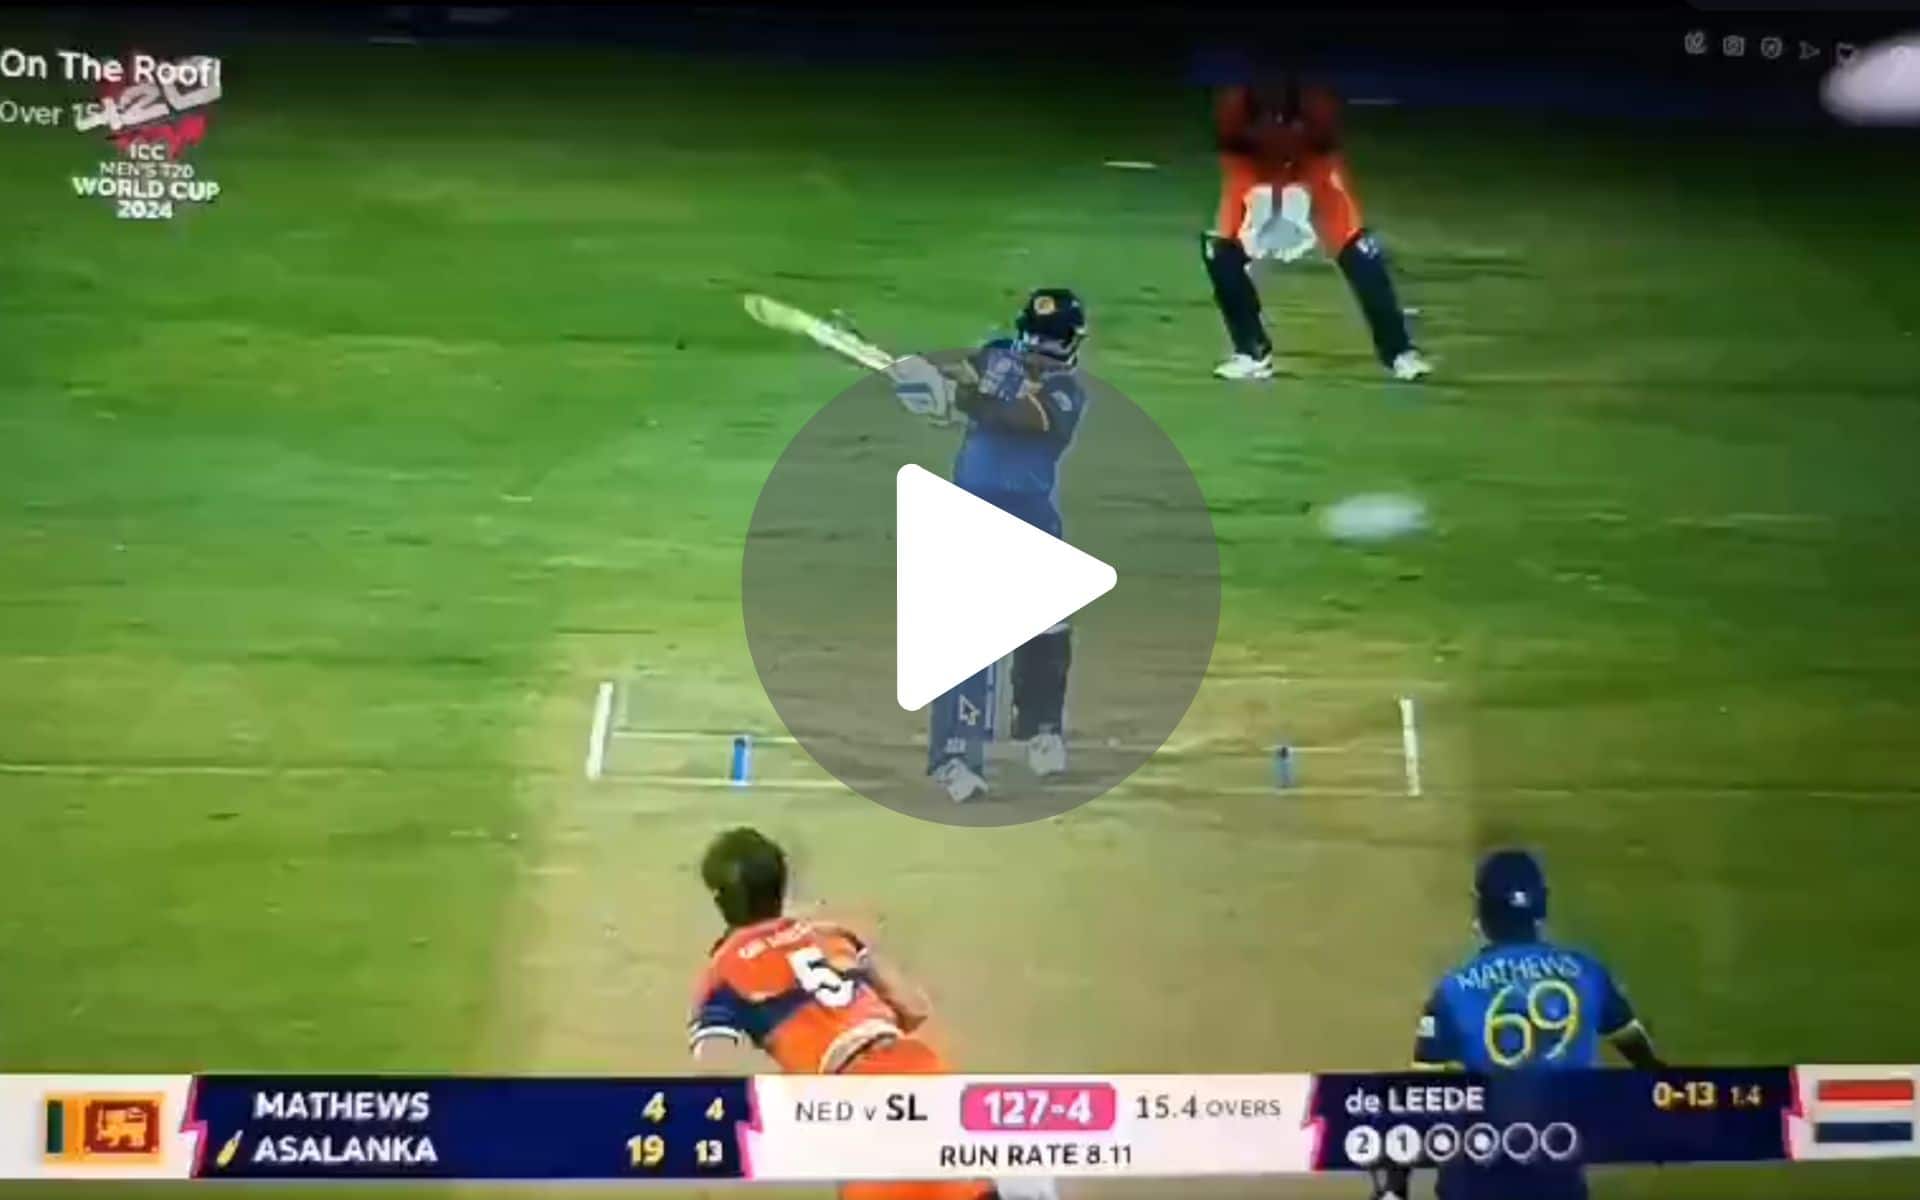 [Watch] Charith Asalanka Turns Chris Gayle As He Sends De Leede Out Of The Ground